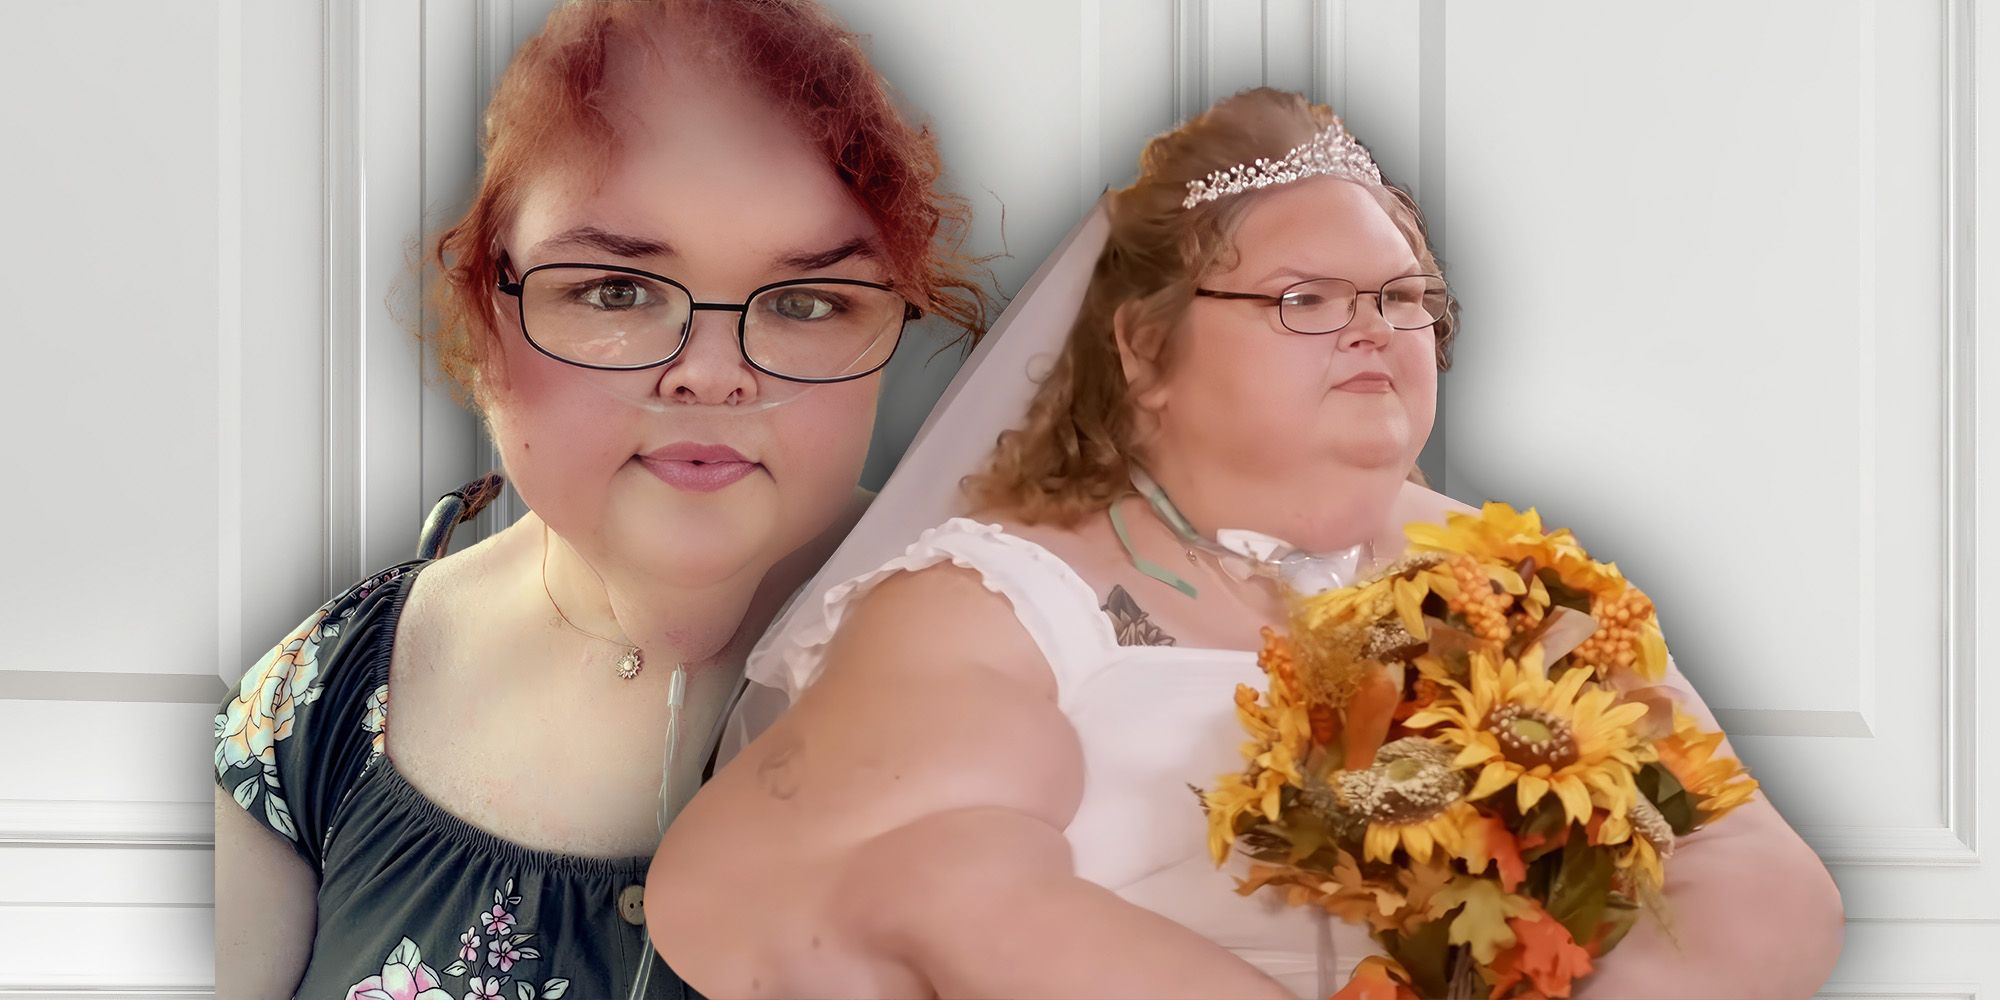 Side by side images of Tammy Slaton from 1000-Lb Sisters, one wearing a wedding dress